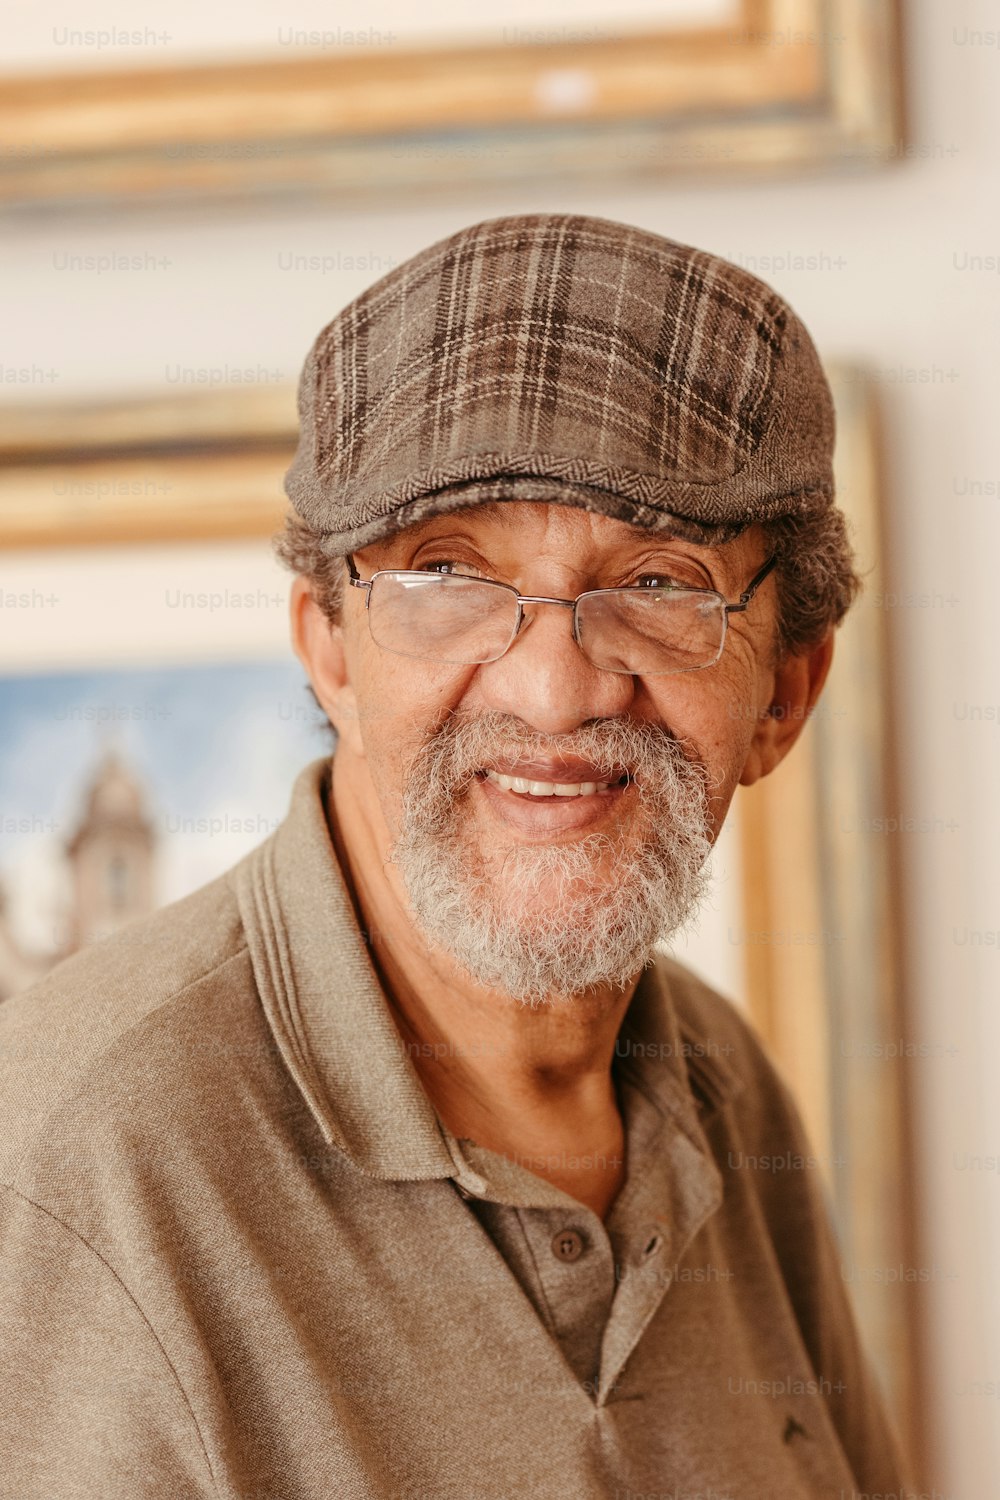 a man with glasses and a hat smiling